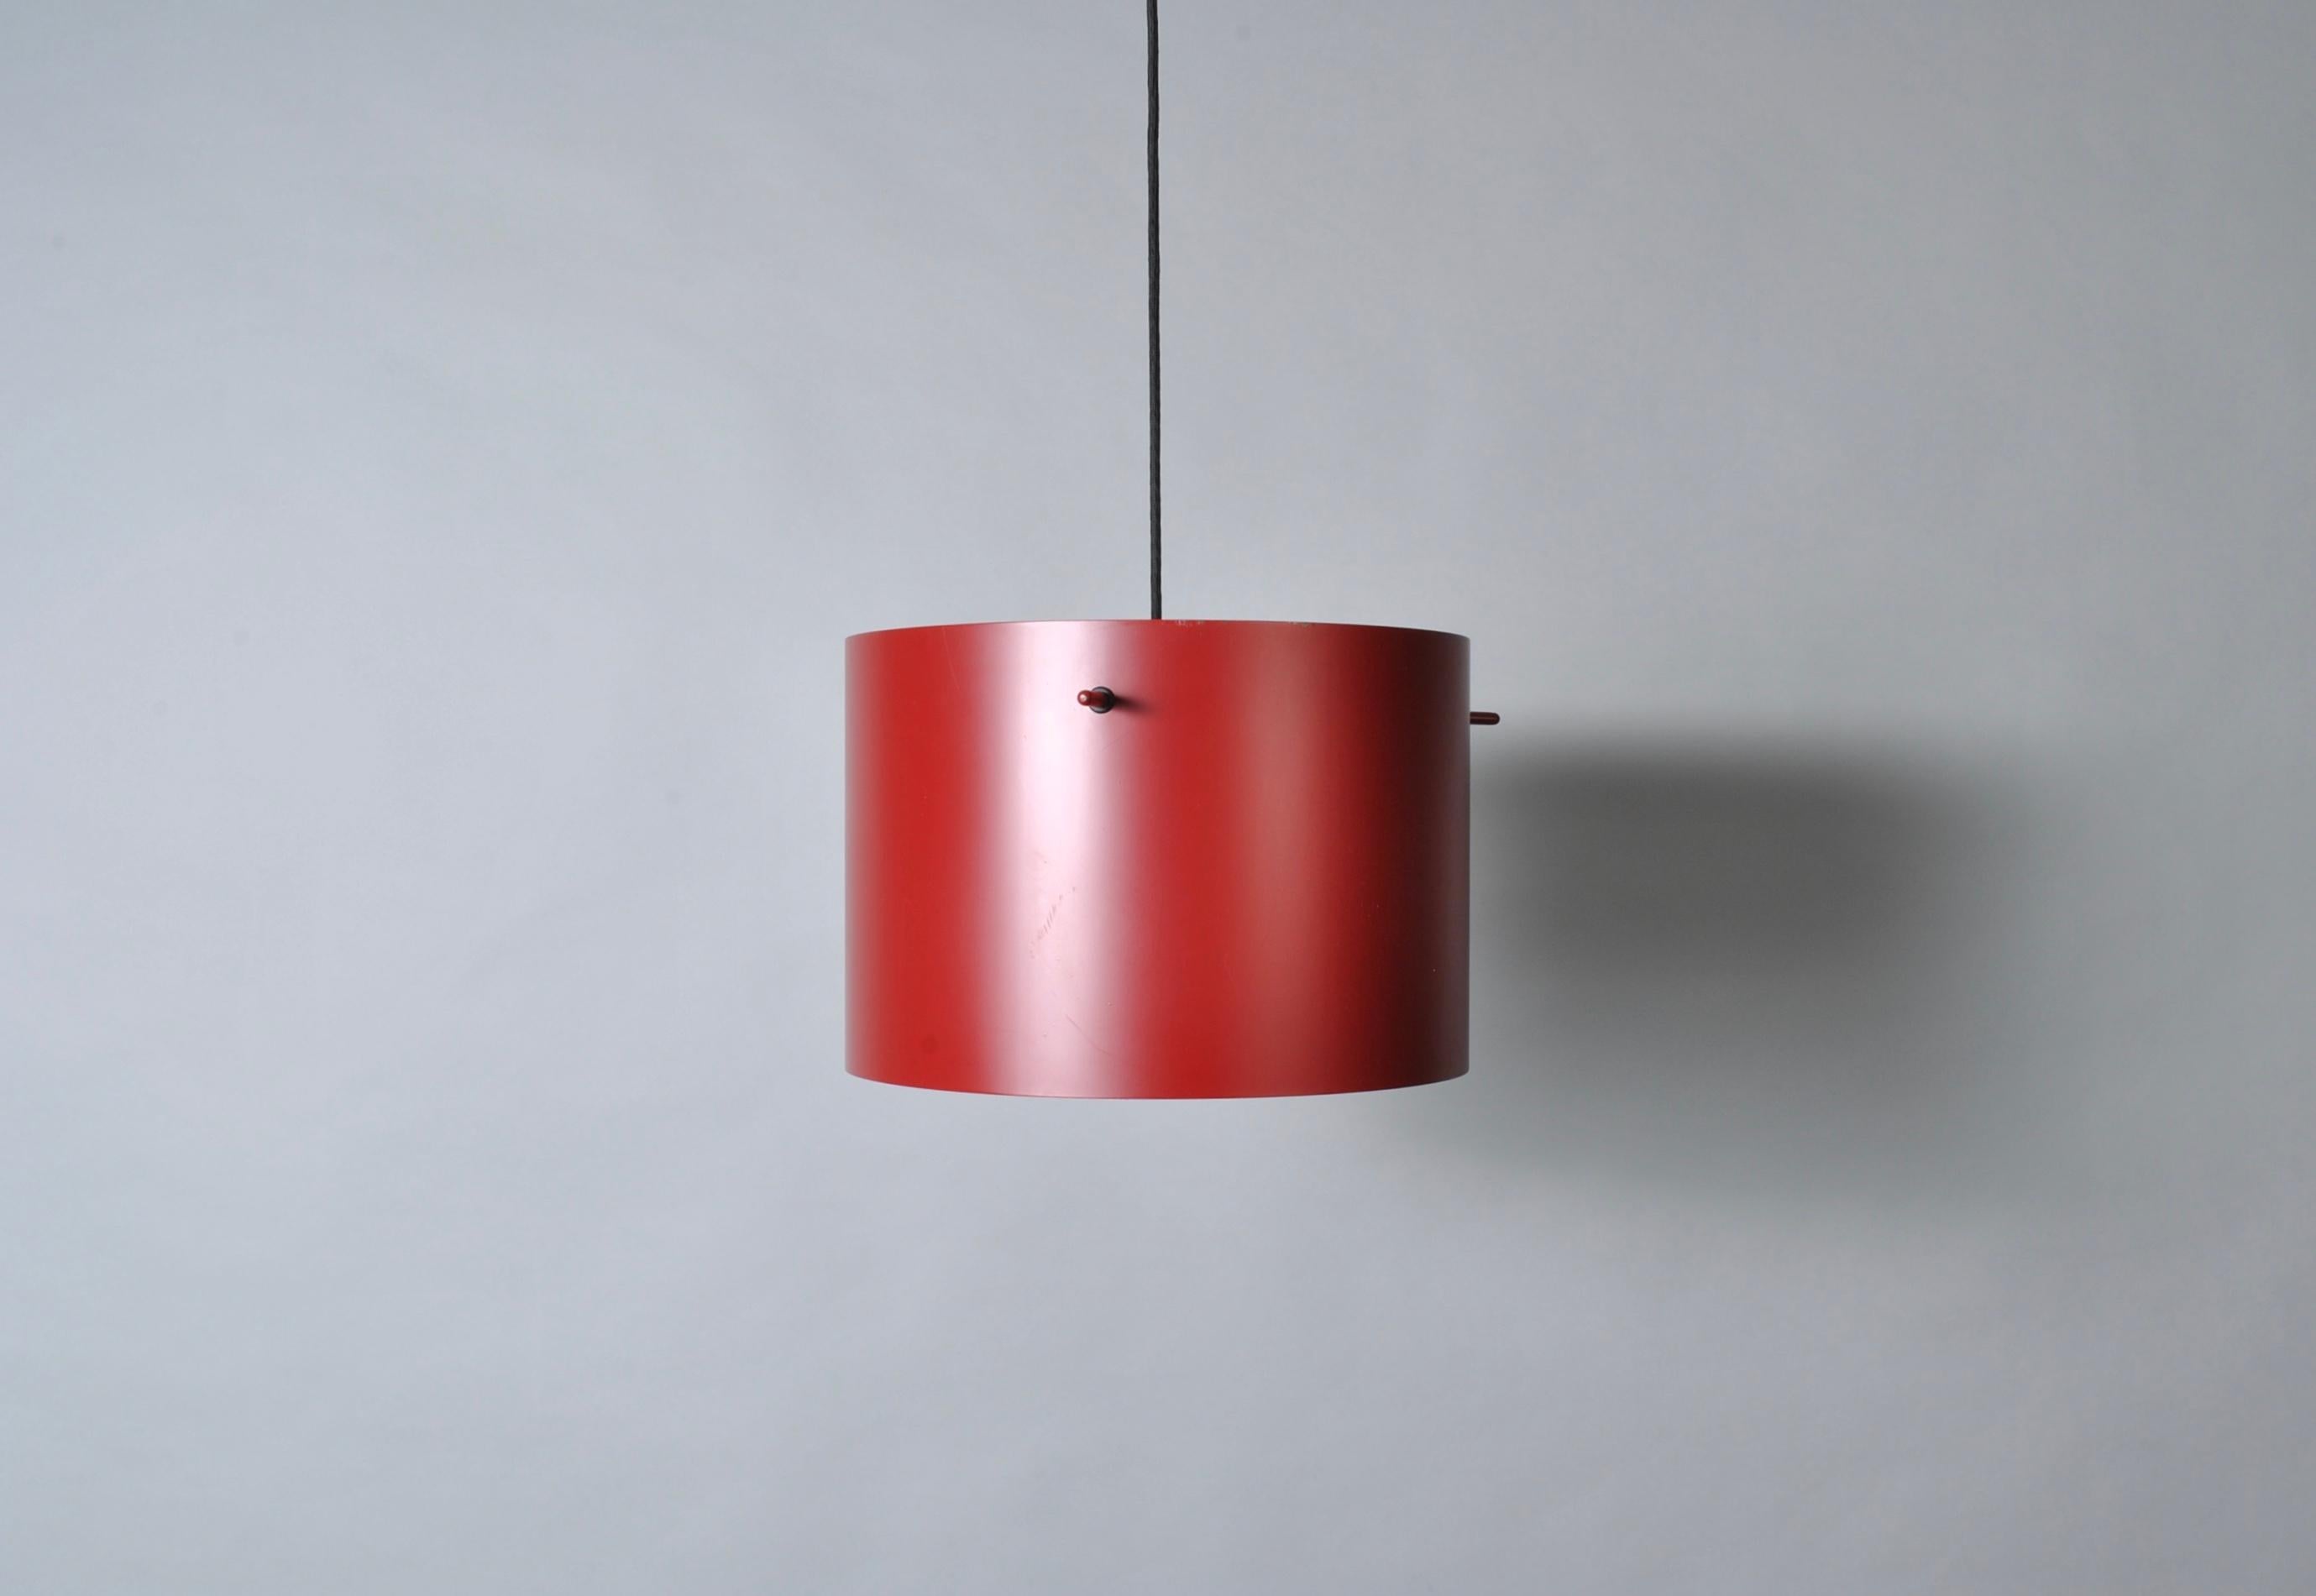 A lovely pair of cylindrical bright red pendants, model FM1954, designed by the Danish architects Knud Friis and Elmar Moltke Nielsen in 1954. They were manufactured by Lampas during the 1970s. Made with aluminium and steel.
Very good quality